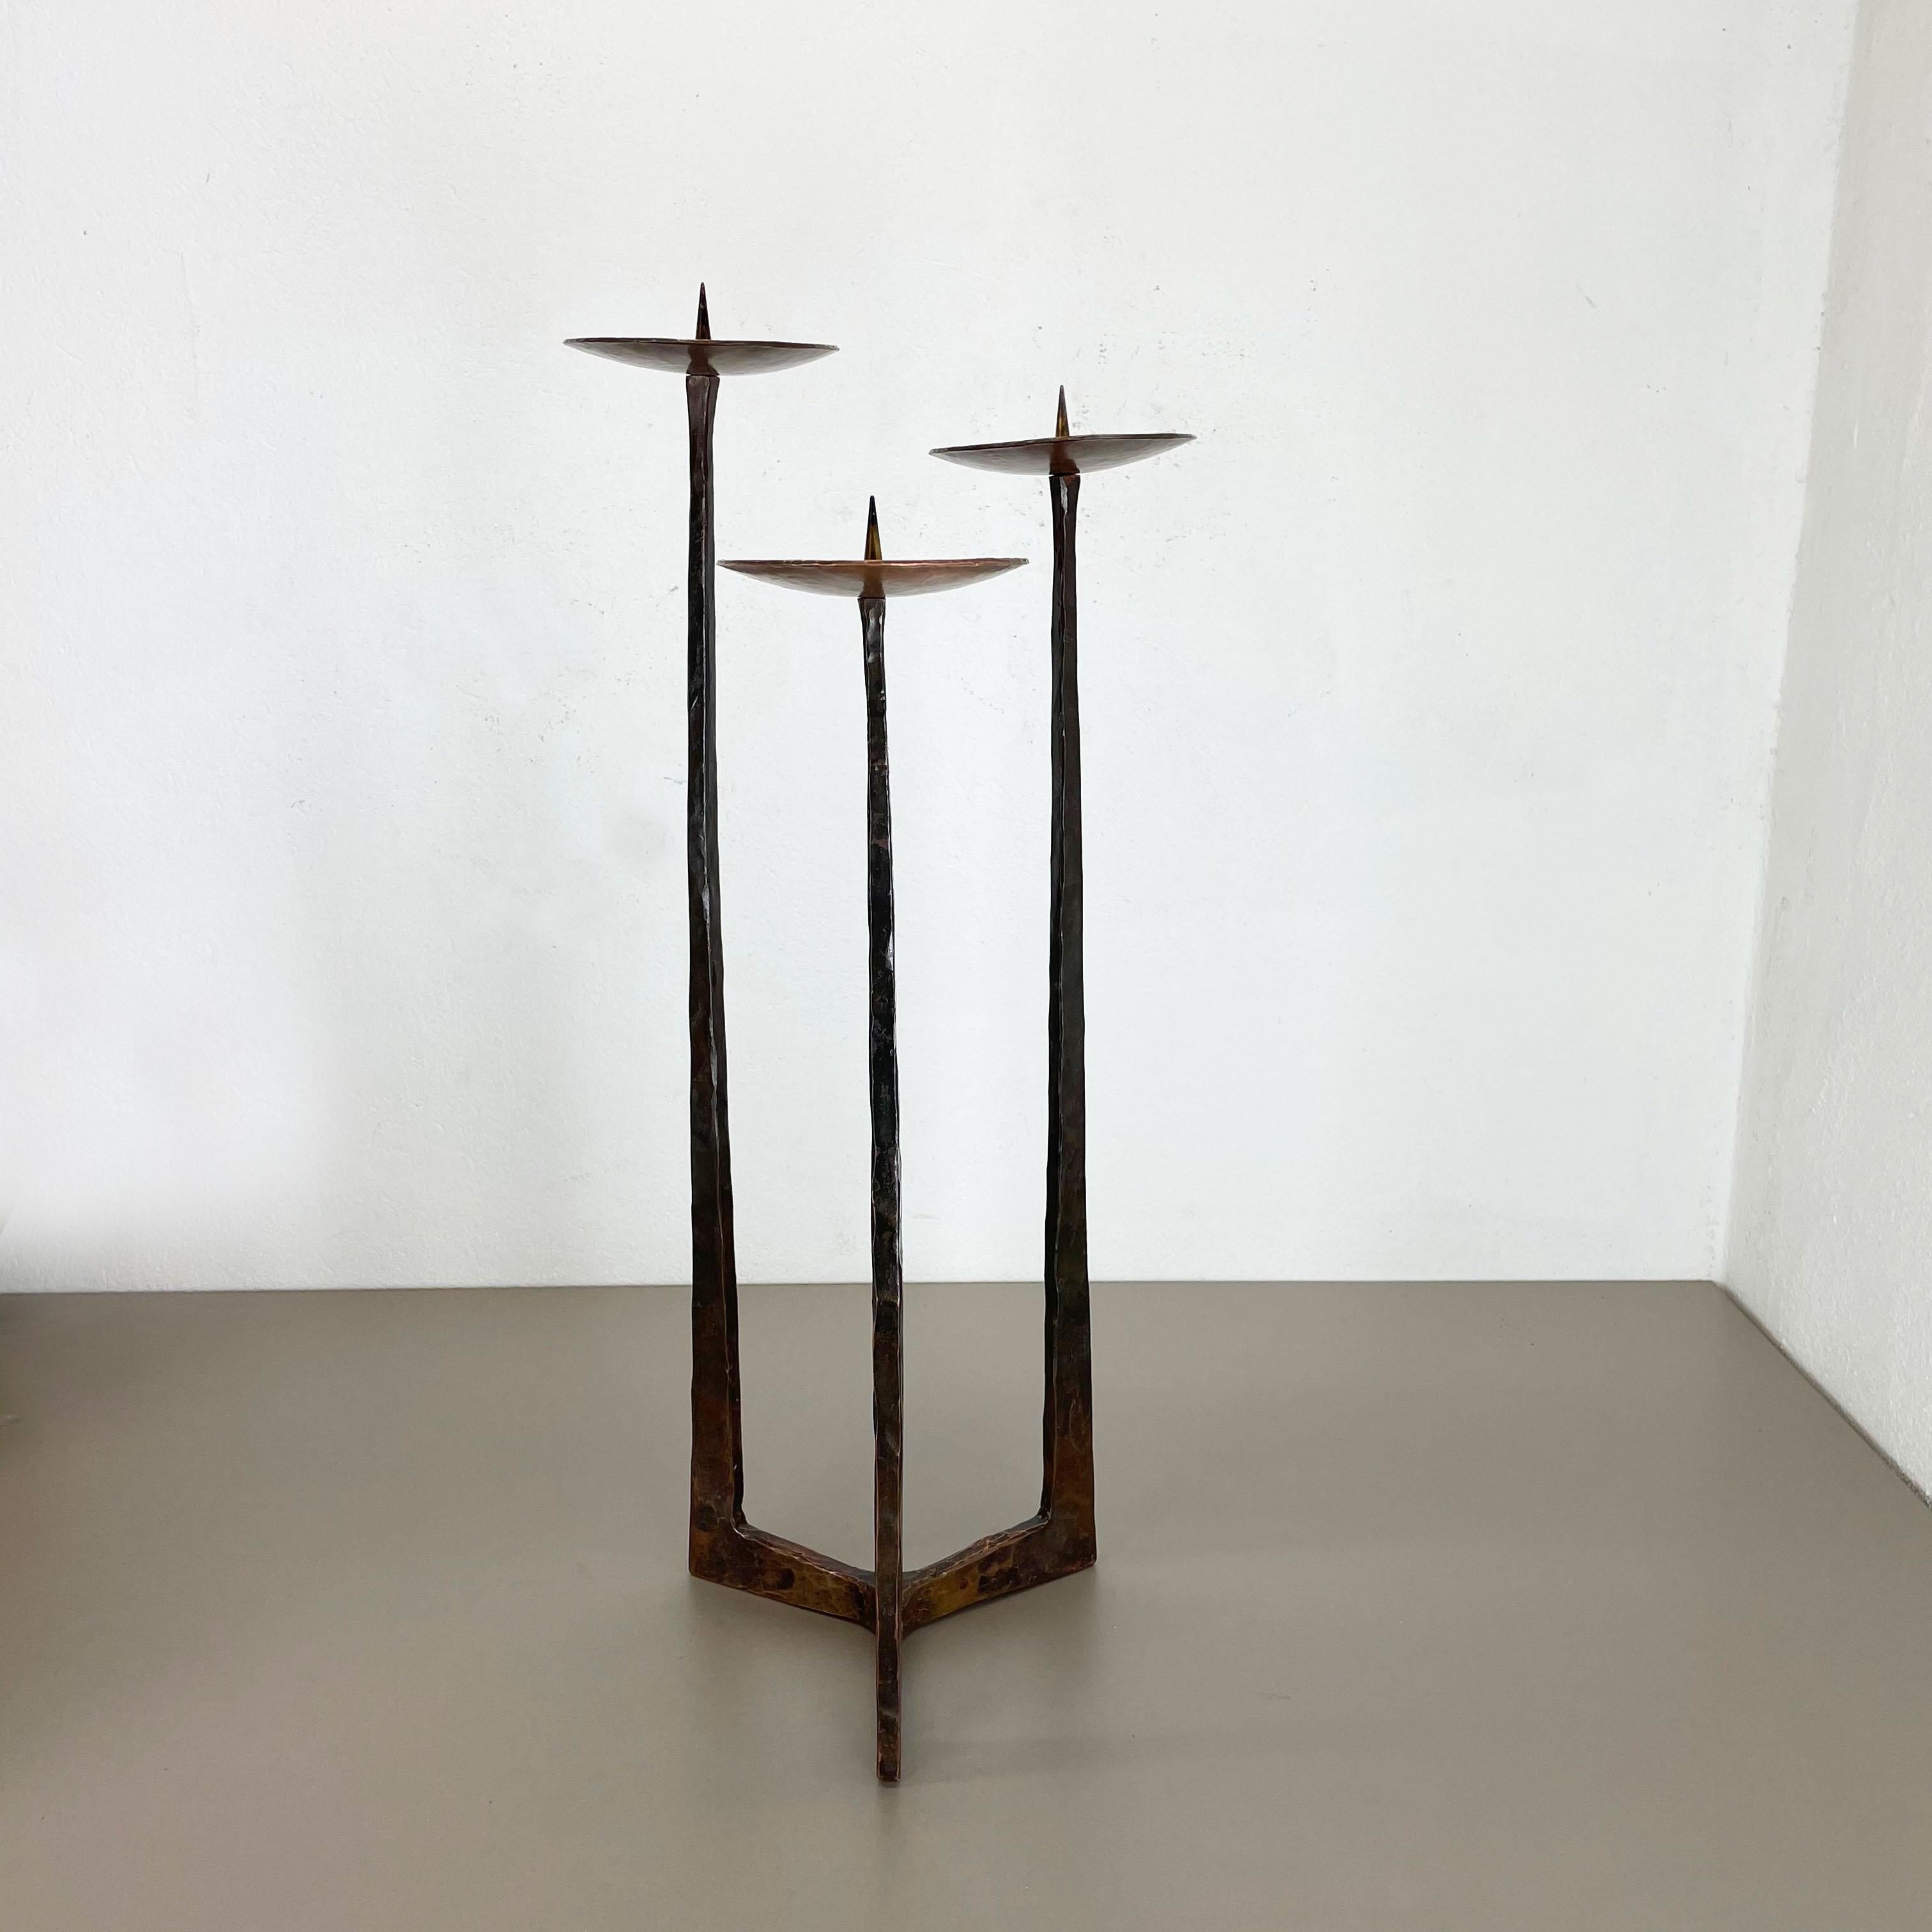 Article: Brutalist floor candleholder

Origin: Austria

Material: Solid copper candleholder stacking made of brass

Decade: 1950s

Description: This original vintage candleholder, was produced in the 1950s in Austria. it is made of solid